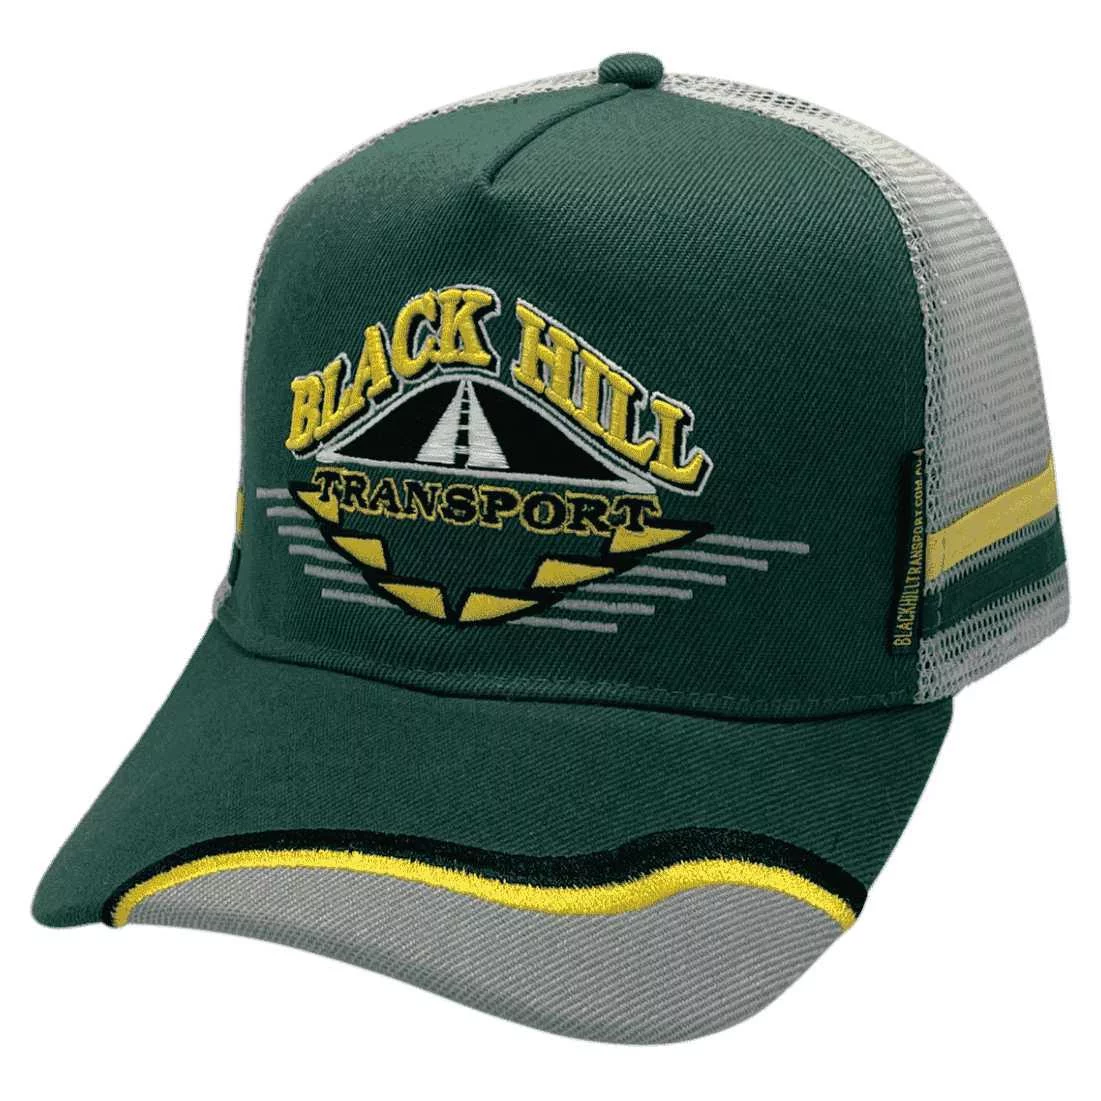 Black Hill Transport Black Hill NSW HP Original Power Aussie Trucker Hat with Design Peak and Double Side Bands Bottle Green Grey Yellow